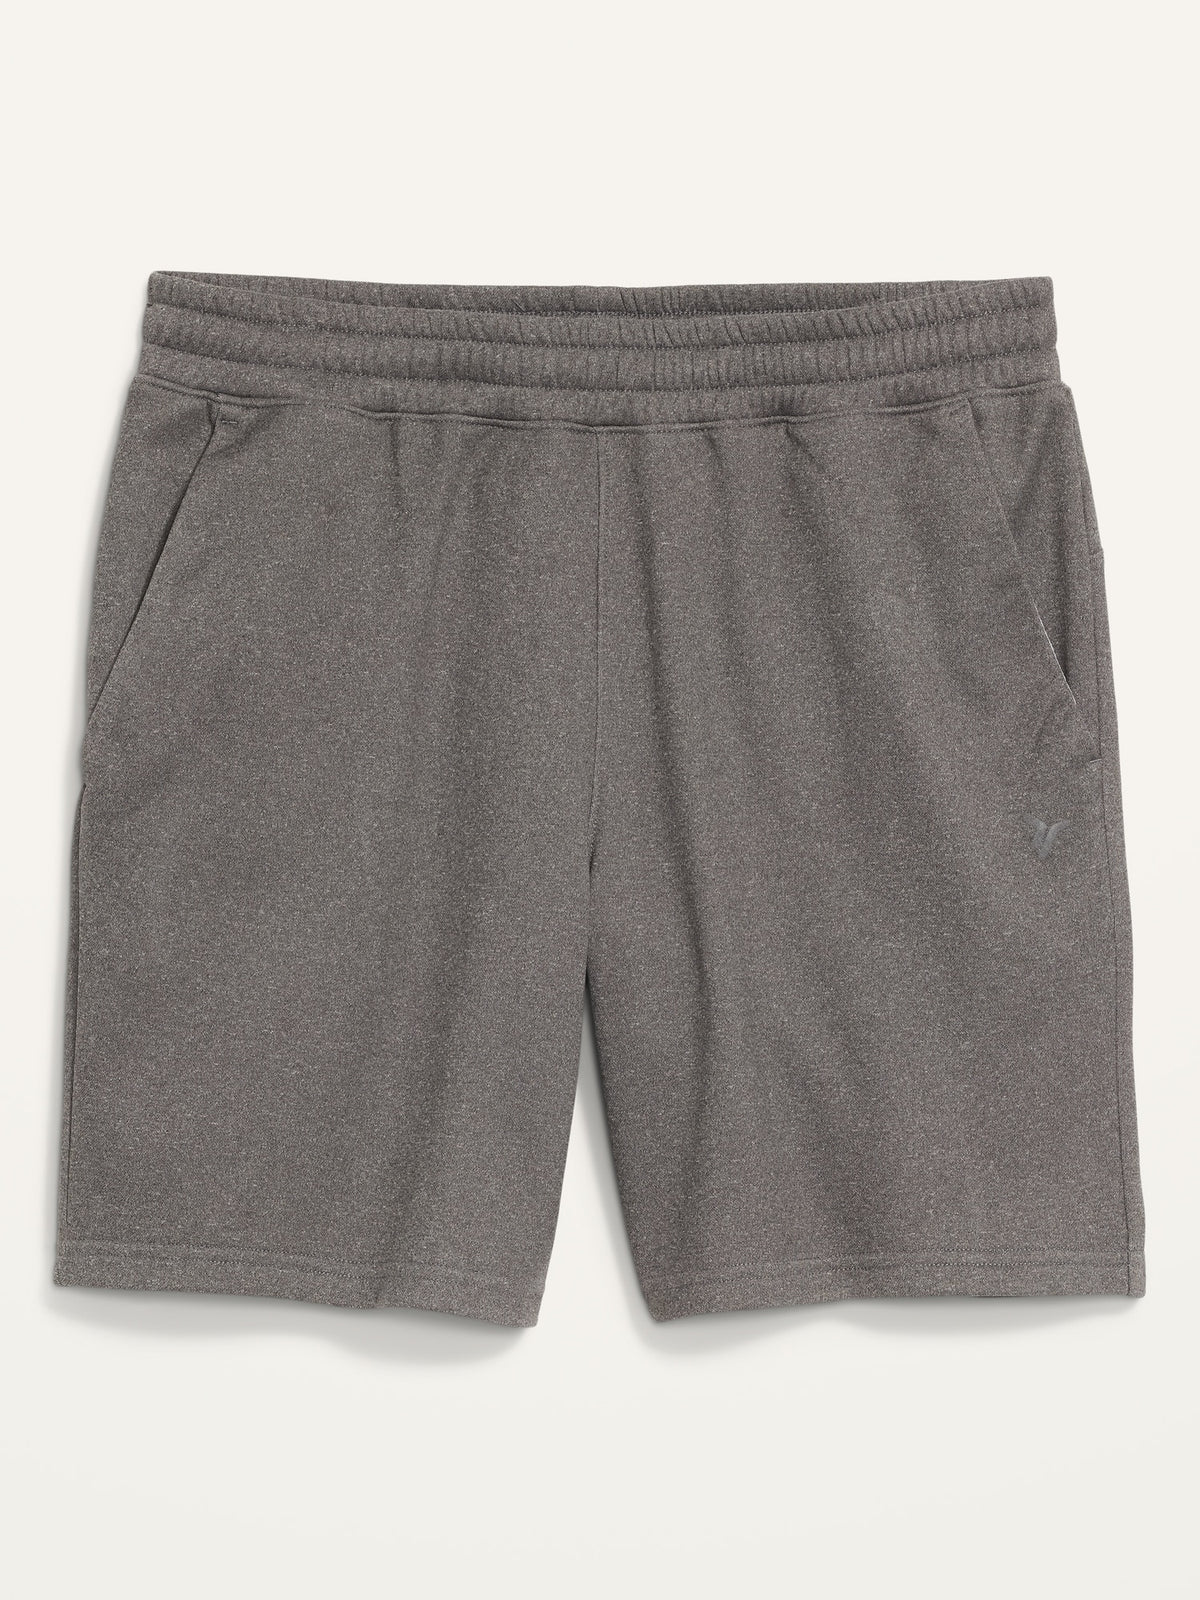 Go-Dry Performance Sweat Shorts for Men -- 7-inch inseam - Old Navy  Philippines